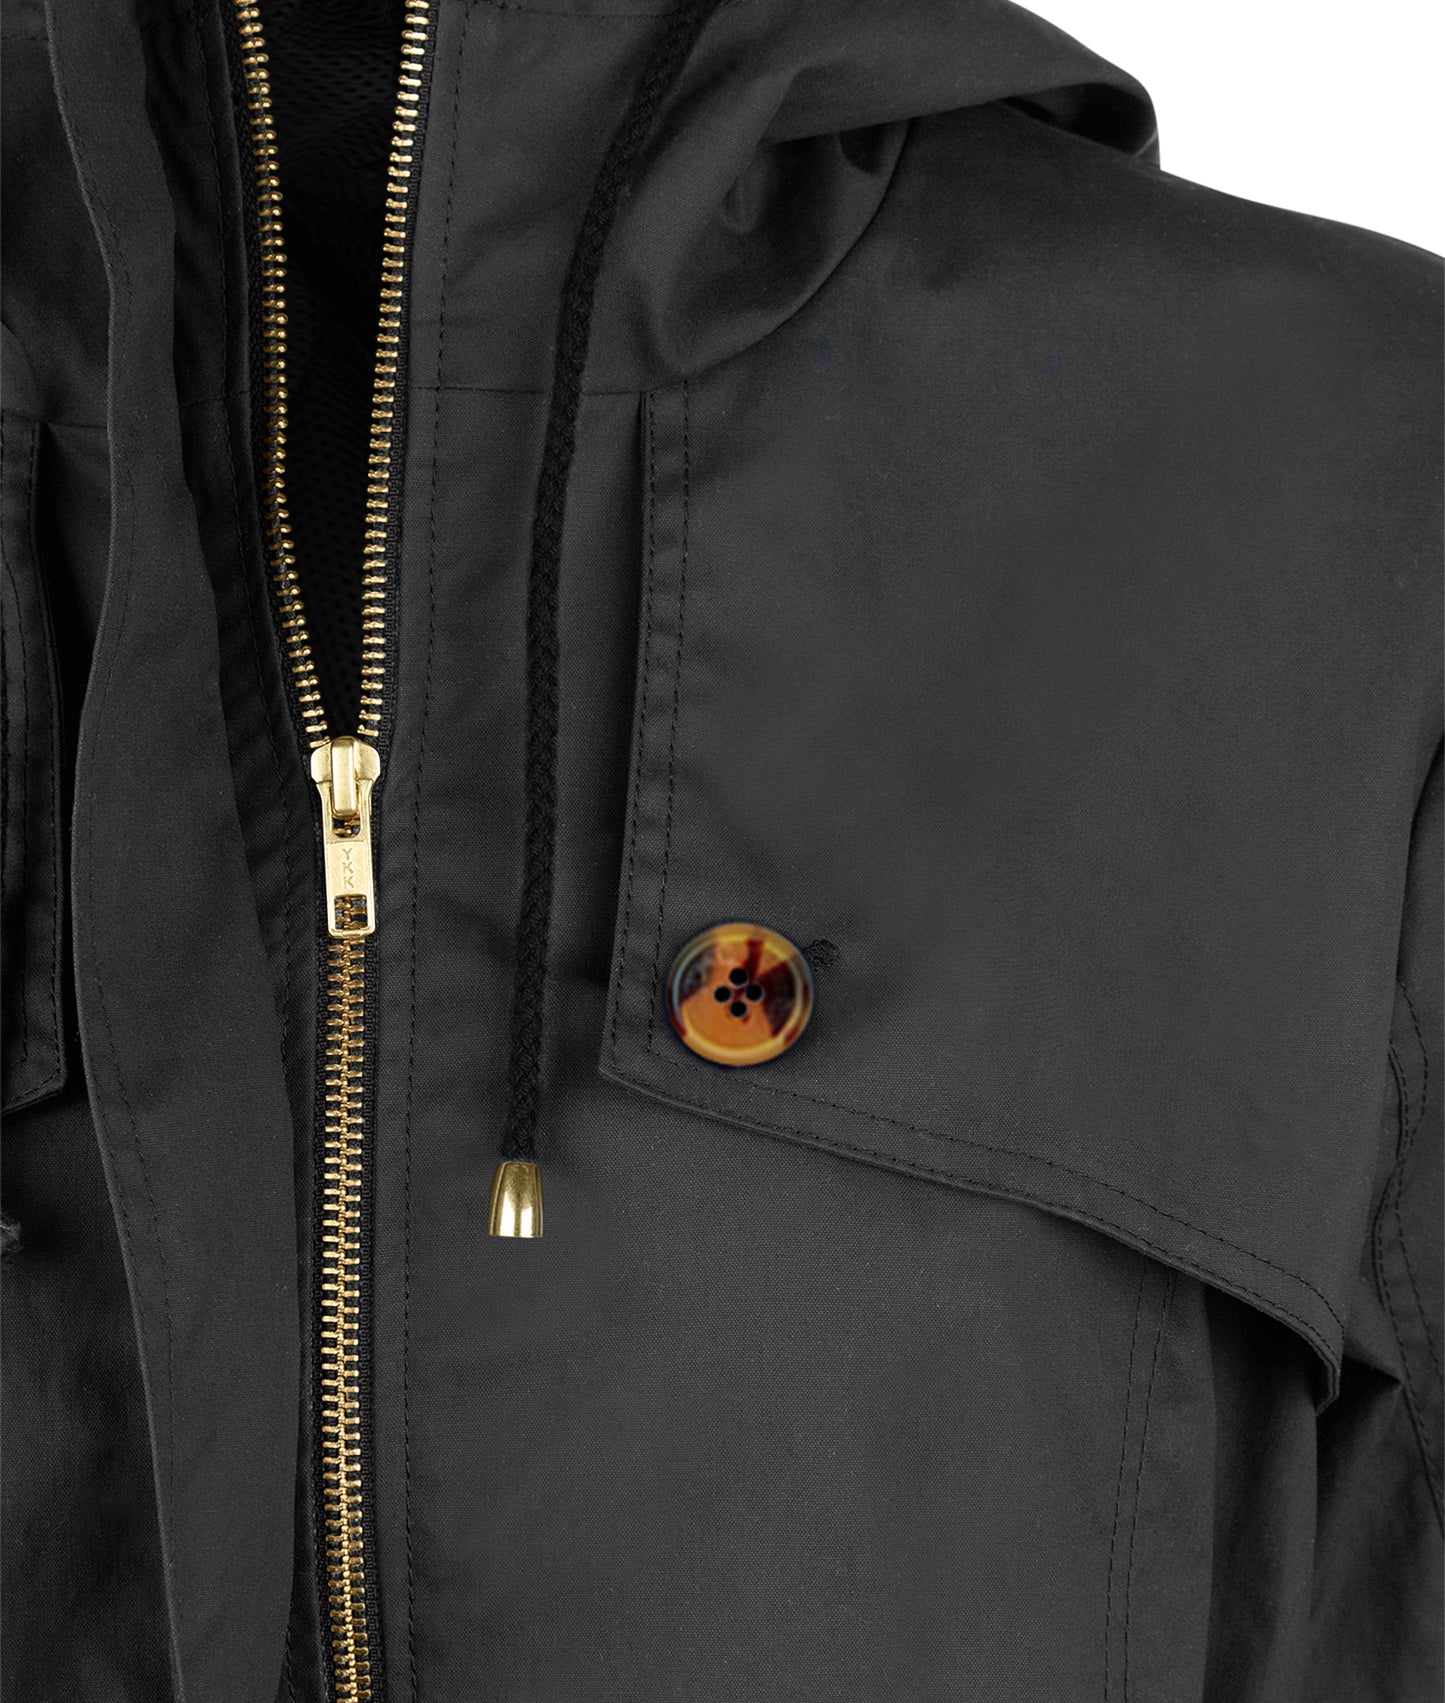 Black Ladies and Women's Waterproof Wax Jacket or Coat with Tortoiseshell Buttons